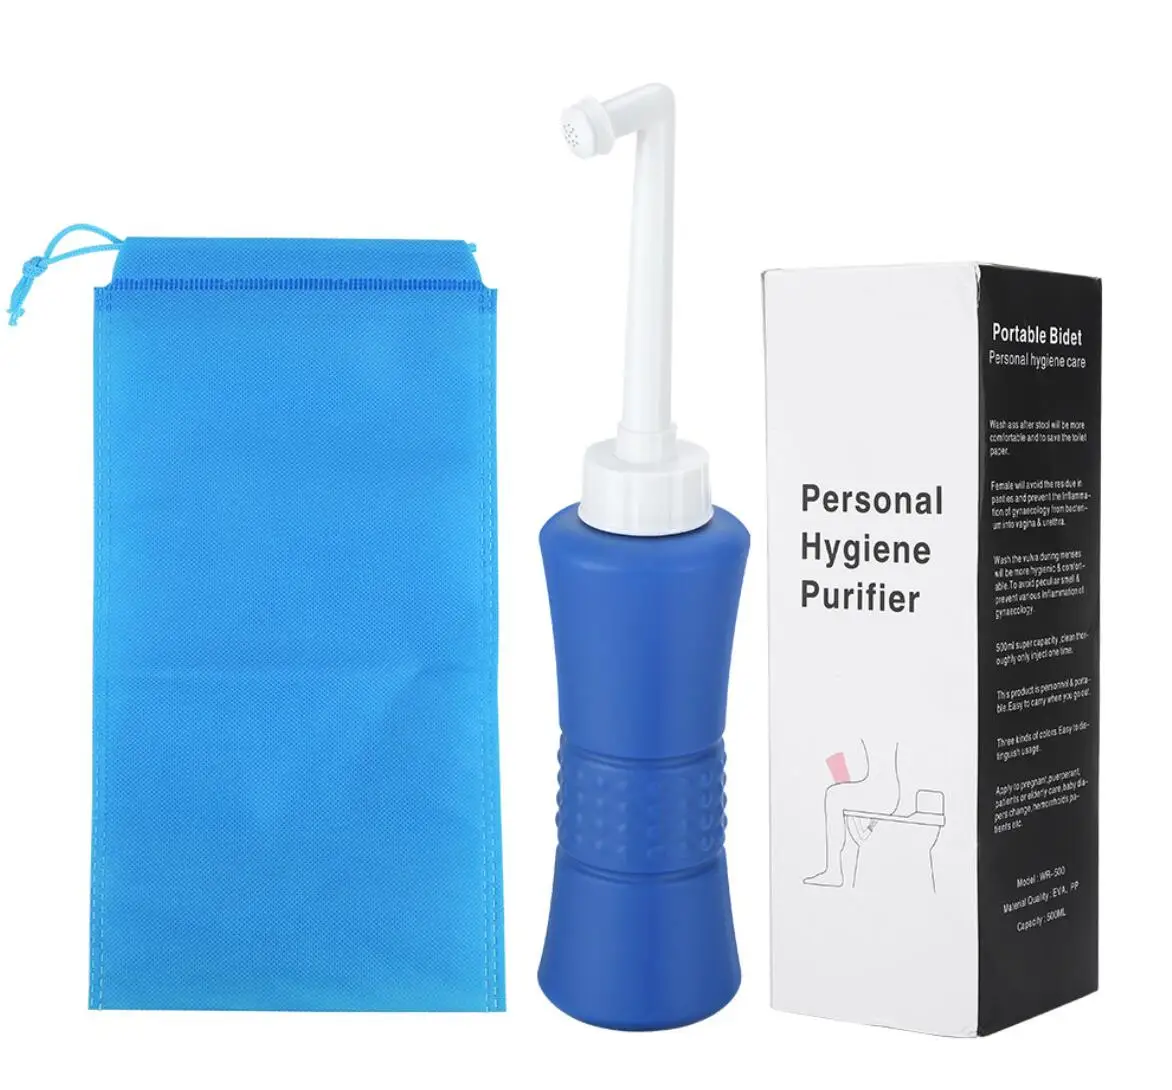 

Newest Design Soothing Postpartum Care Perineal Personal Cleaning 450ml Portable Travel Bidet Sprayer Upside Down Peri Bottle